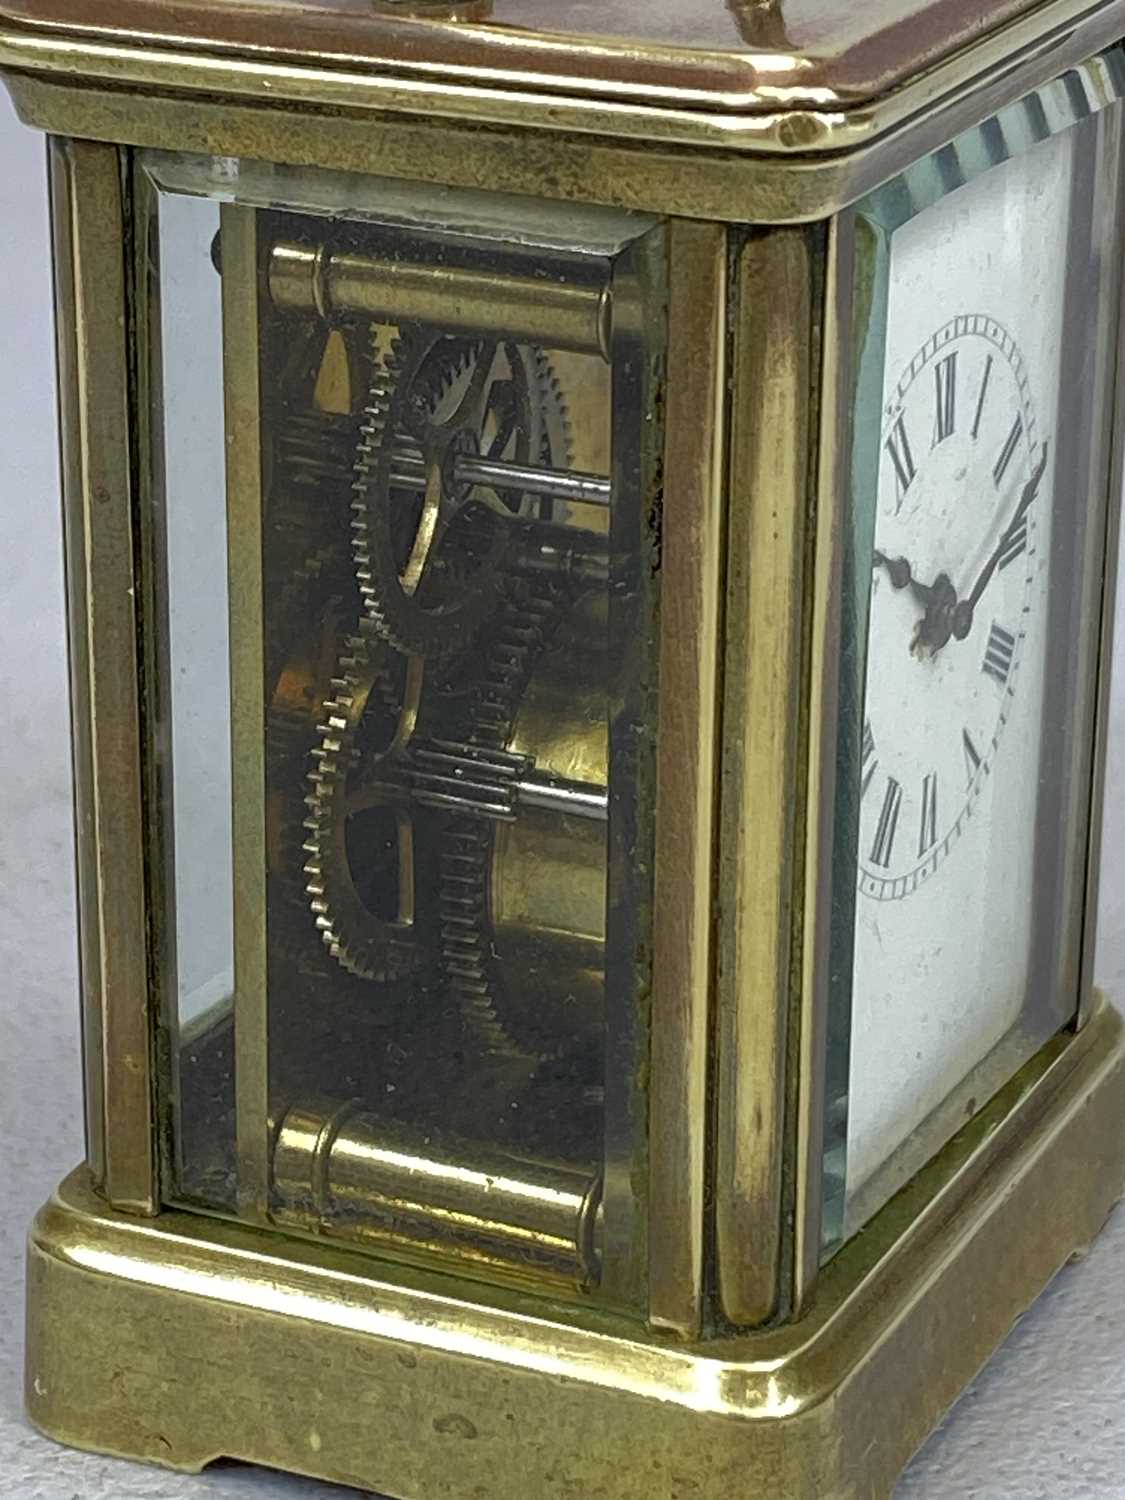 EARLY 20TH CENTURY MINIATURE CARRIAGE CLOCK, single train within a brass case with bevelled glass - Image 3 of 4